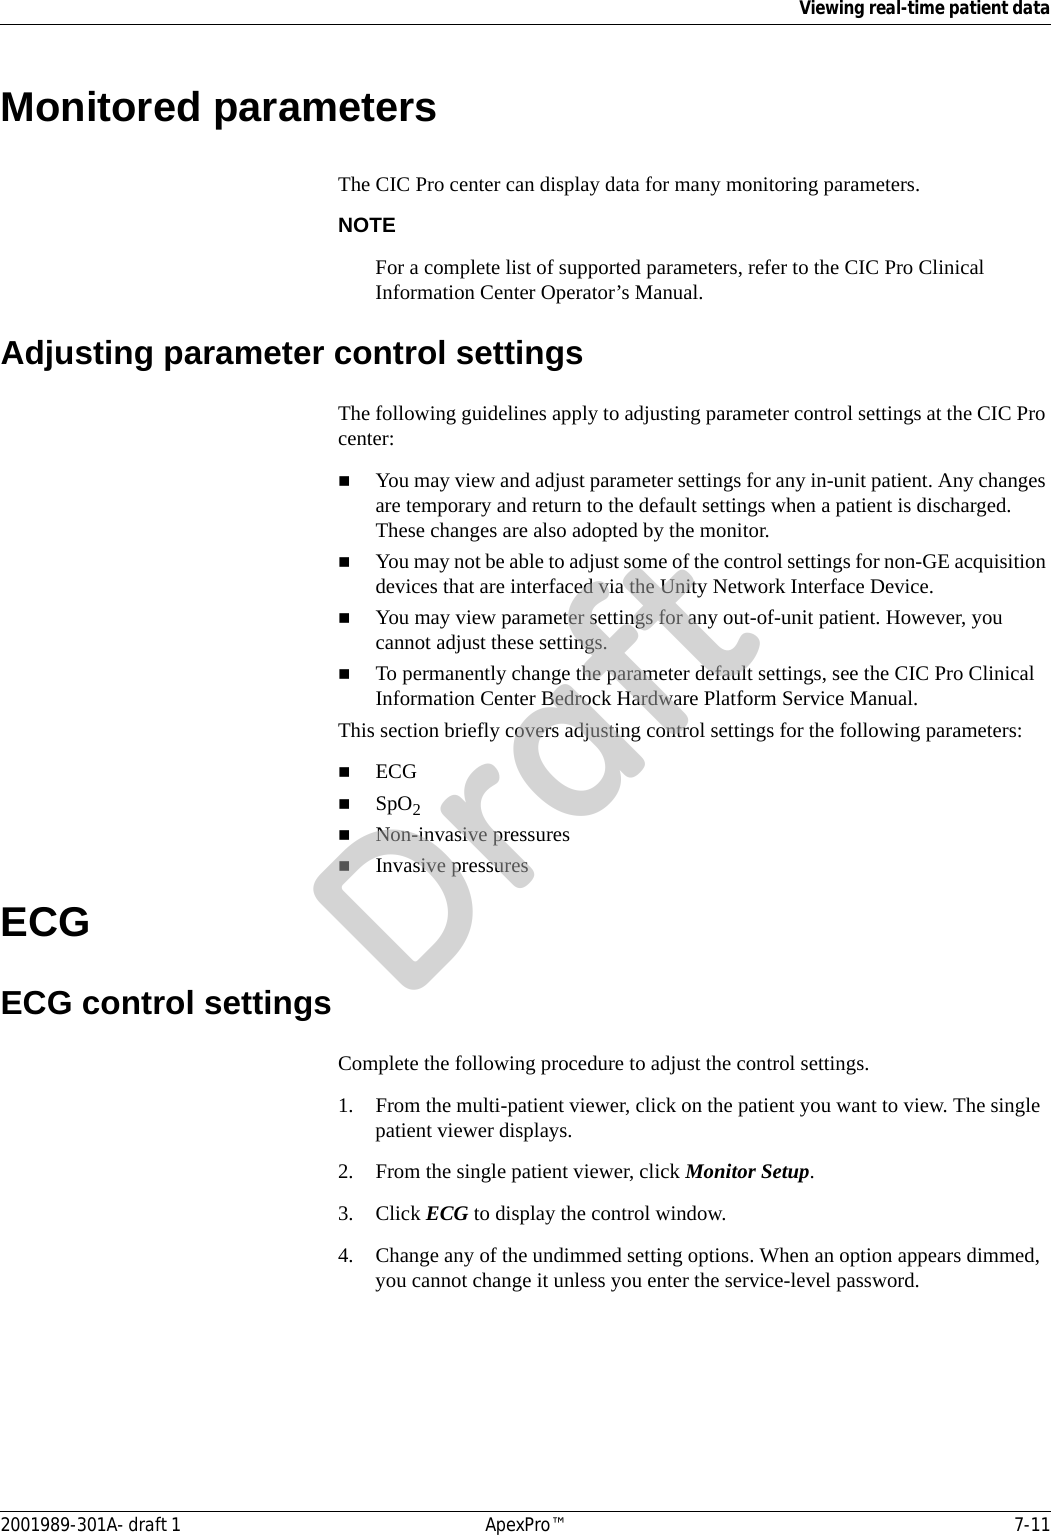 Viewing real-time patient data2001989-301A- draft 1 ApexPro™ 7-11Monitored parametersThe CIC Pro center can display data for many monitoring parameters. NOTEFor a complete list of supported parameters, refer to the CIC Pro Clinical Information Center Operator’s Manual.Adjusting parameter control settingsThe following guidelines apply to adjusting parameter control settings at the CIC Pro center:You may view and adjust parameter settings for any in-unit patient. Any changes are temporary and return to the default settings when a patient is discharged. These changes are also adopted by the monitor. You may not be able to adjust some of the control settings for non-GE acquisition devices that are interfaced via the Unity Network Interface Device.You may view parameter settings for any out-of-unit patient. However, you cannot adjust these settings.To permanently change the parameter default settings, see the CIC Pro Clinical Information Center Bedrock Hardware Platform Service Manual.This section briefly covers adjusting control settings for the following parameters:ECGSpO2Non-invasive pressuresInvasive pressuresECGECG control settingsComplete the following procedure to adjust the control settings.1. From the multi-patient viewer, click on the patient you want to view. The single patient viewer displays.2. From the single patient viewer, click Monitor Setup.3. Click ECG to display the control window.4. Change any of the undimmed setting options. When an option appears dimmed, you cannot change it unless you enter the service-level password.Draft